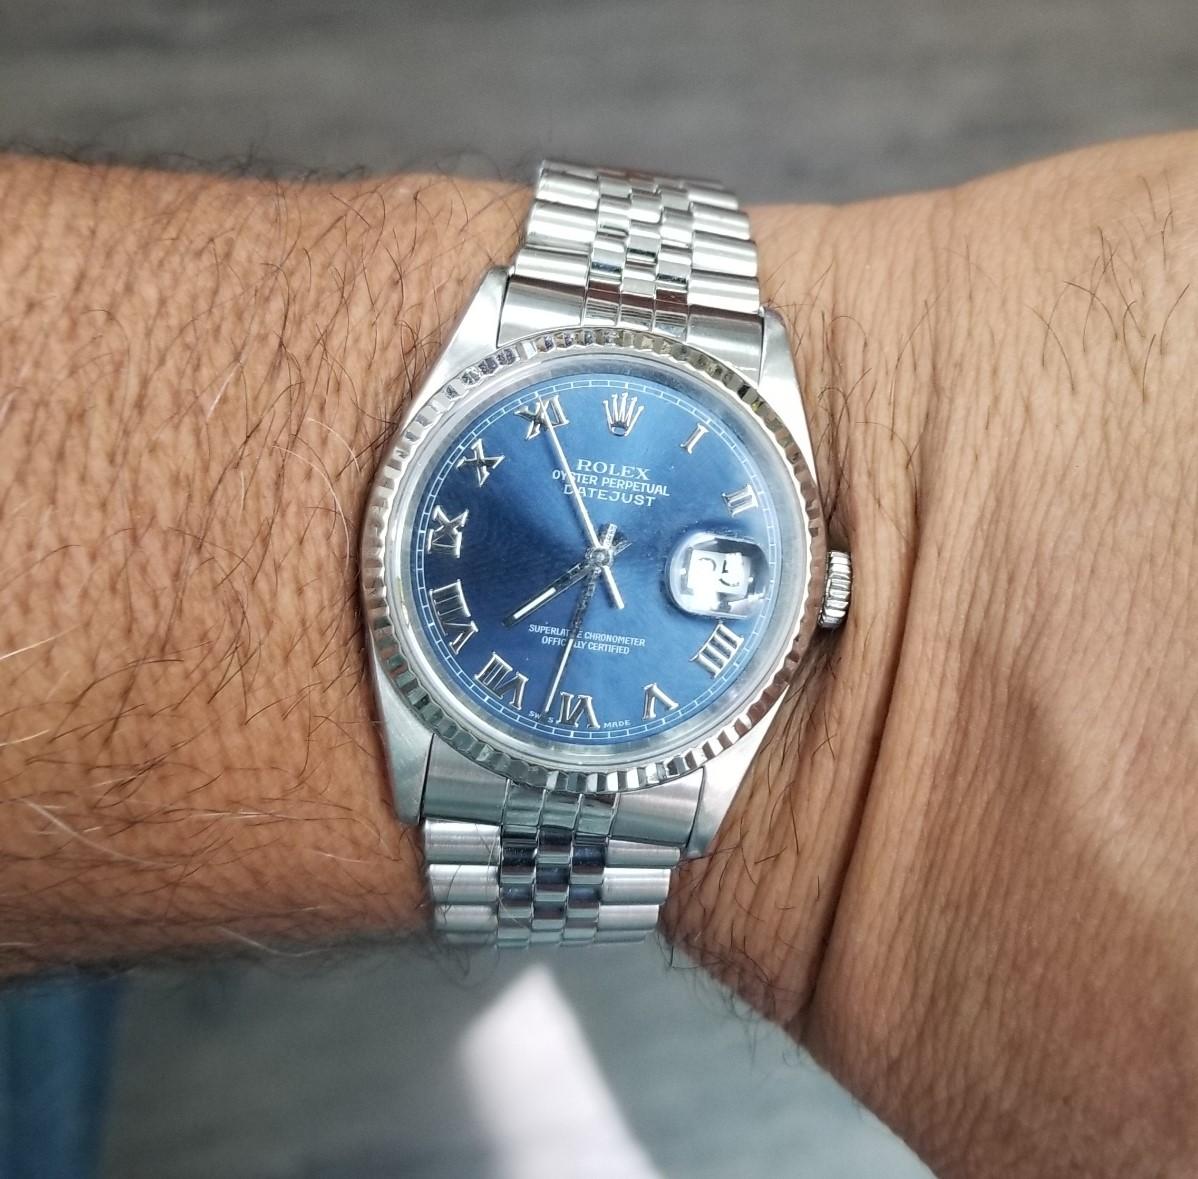 Rolex Date 34mm Blue Dial Roman Numeral
Accent Dial Jubilee Band 
Creator: Rolex
Design: Datejust Watch Datejust Collection
Case Material:  Stainless Steel
Strap Material:  Stainless Steel
Serial number: X394108
Case Shape: Round
Case Dimensions: